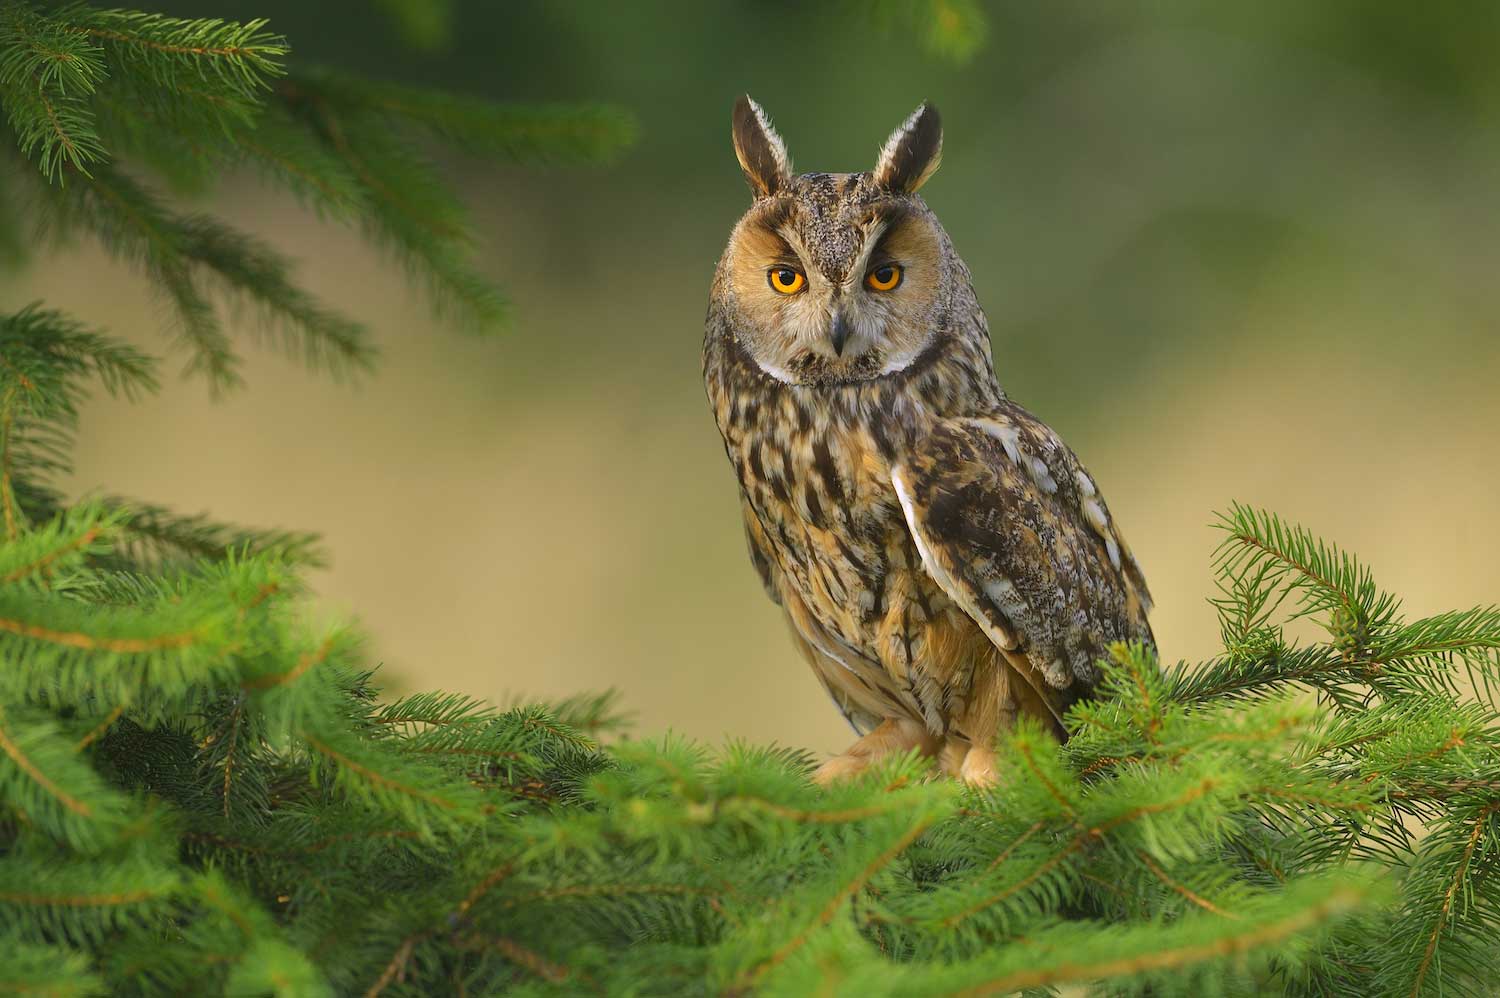 A long-eared owl in an evergreen day.